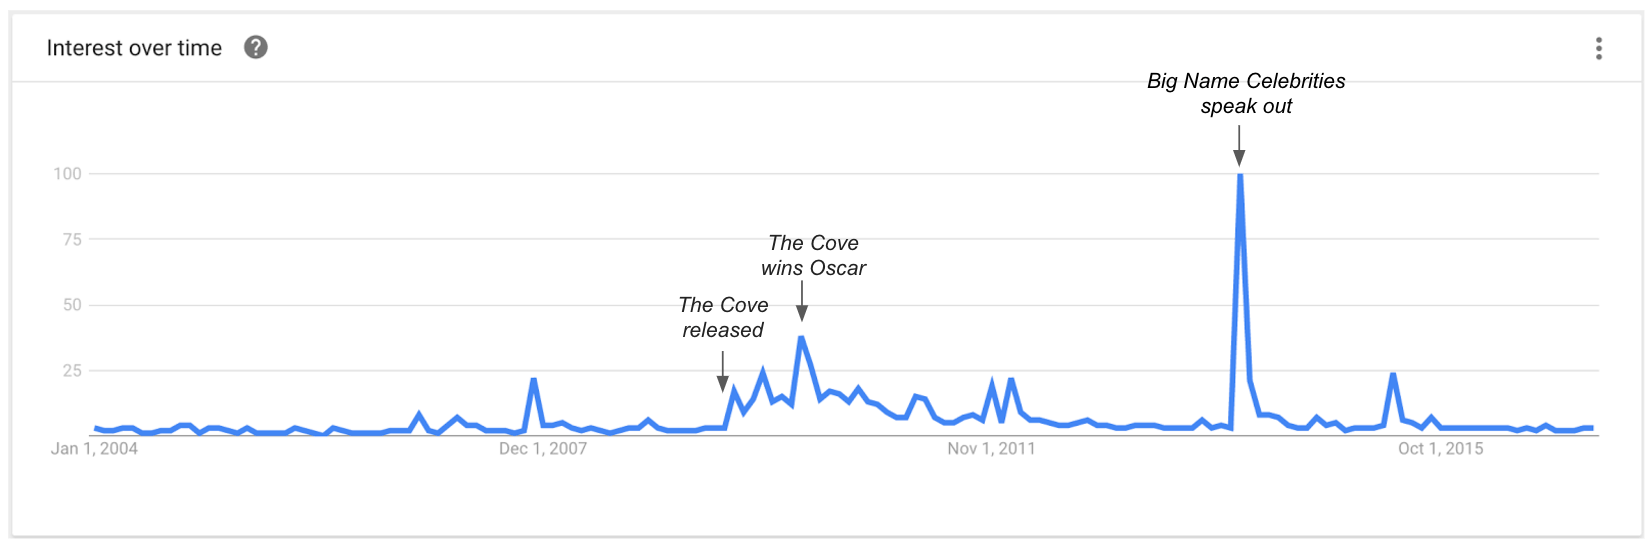 Google Trends shows impact of The Cove on search results